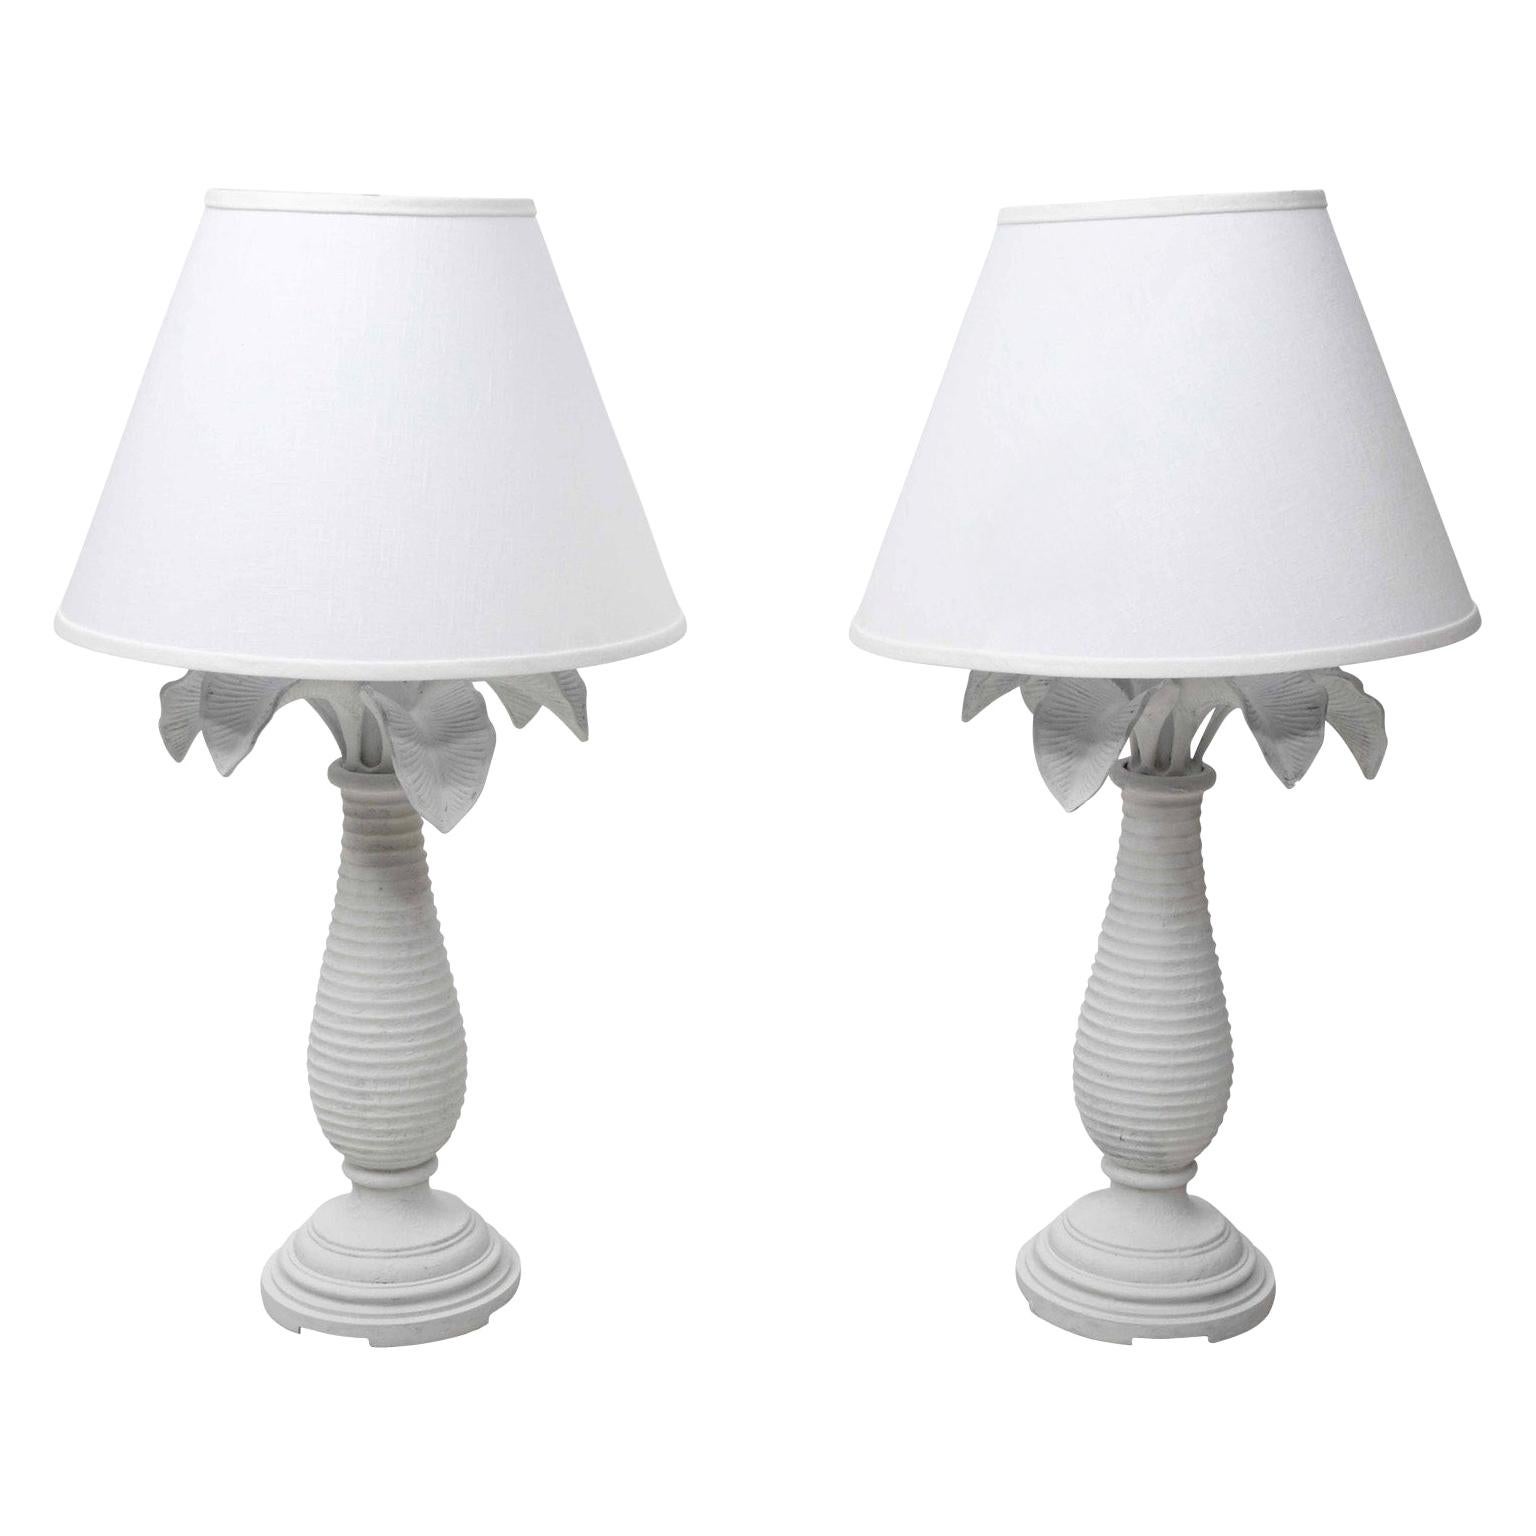 Pair of White Plaster Palm Table Lamps